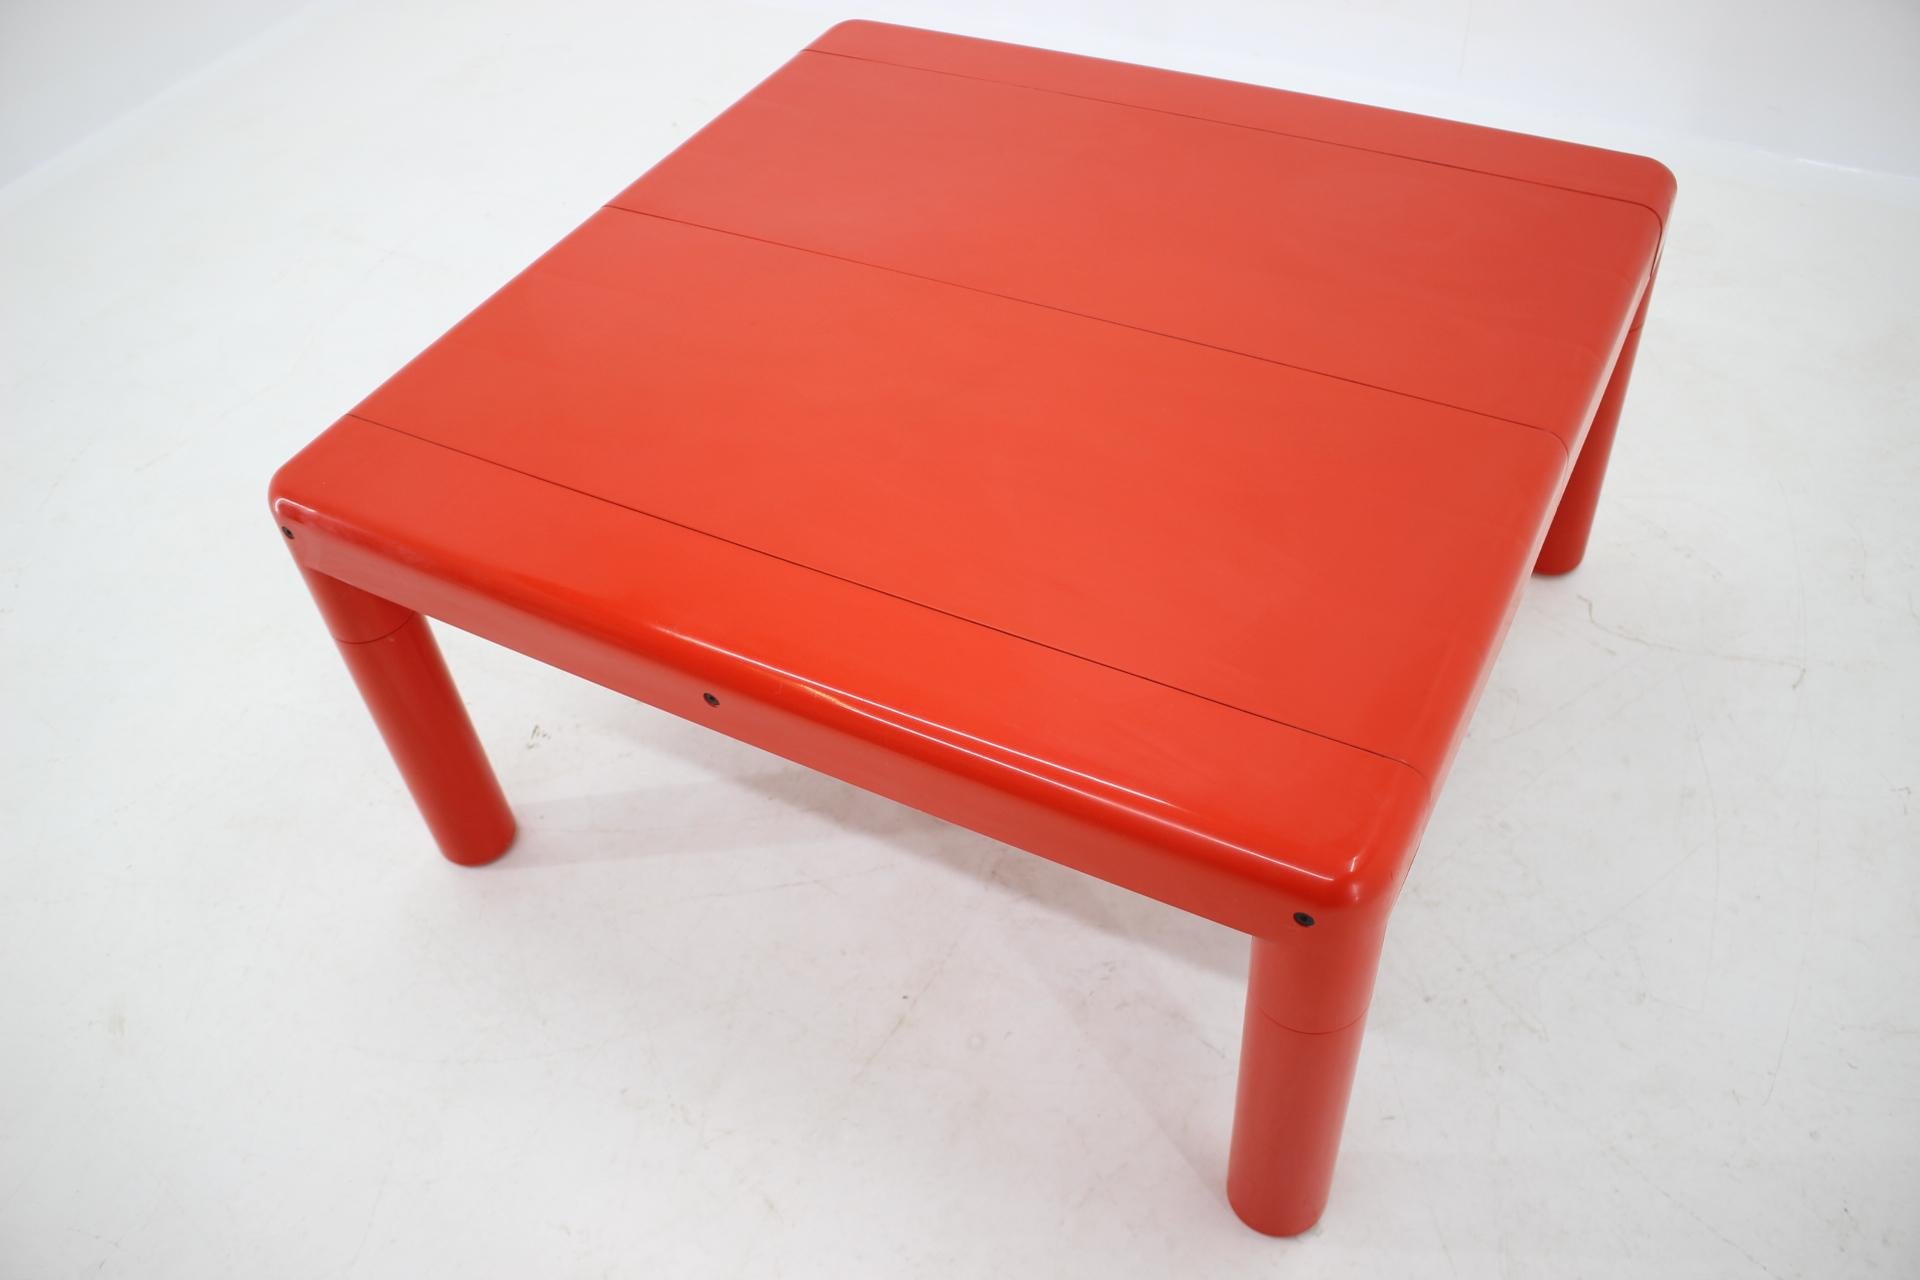 Midcentury Space Age Coffee Table UPO, Eero Aarnio, Finland, 1970s For Sale 2